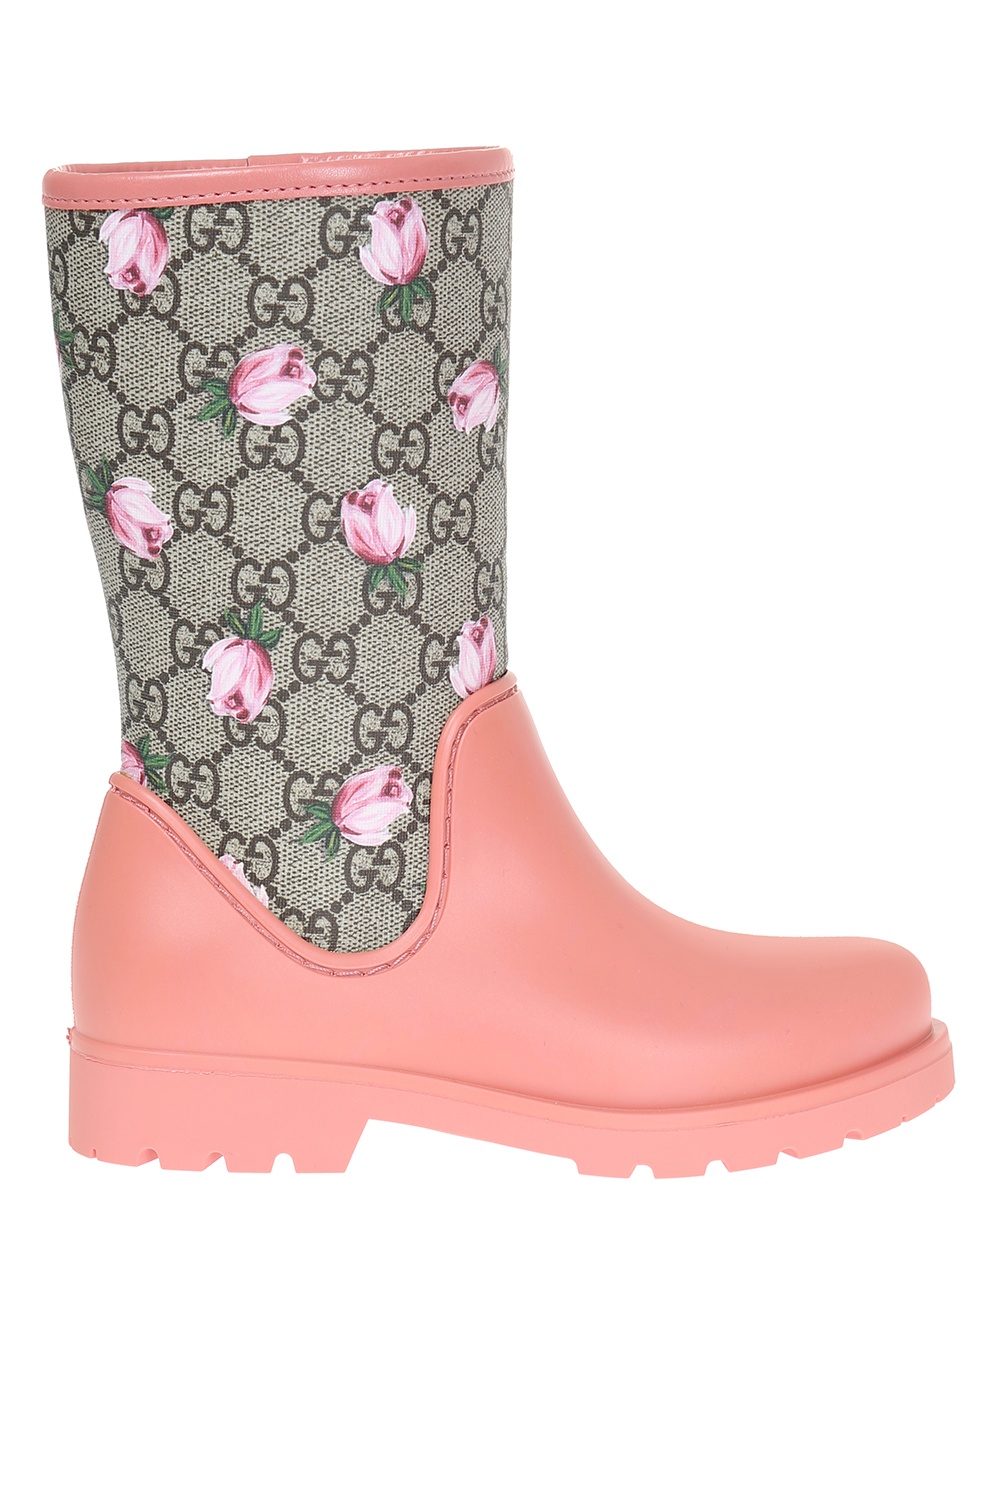 gucci welly boots